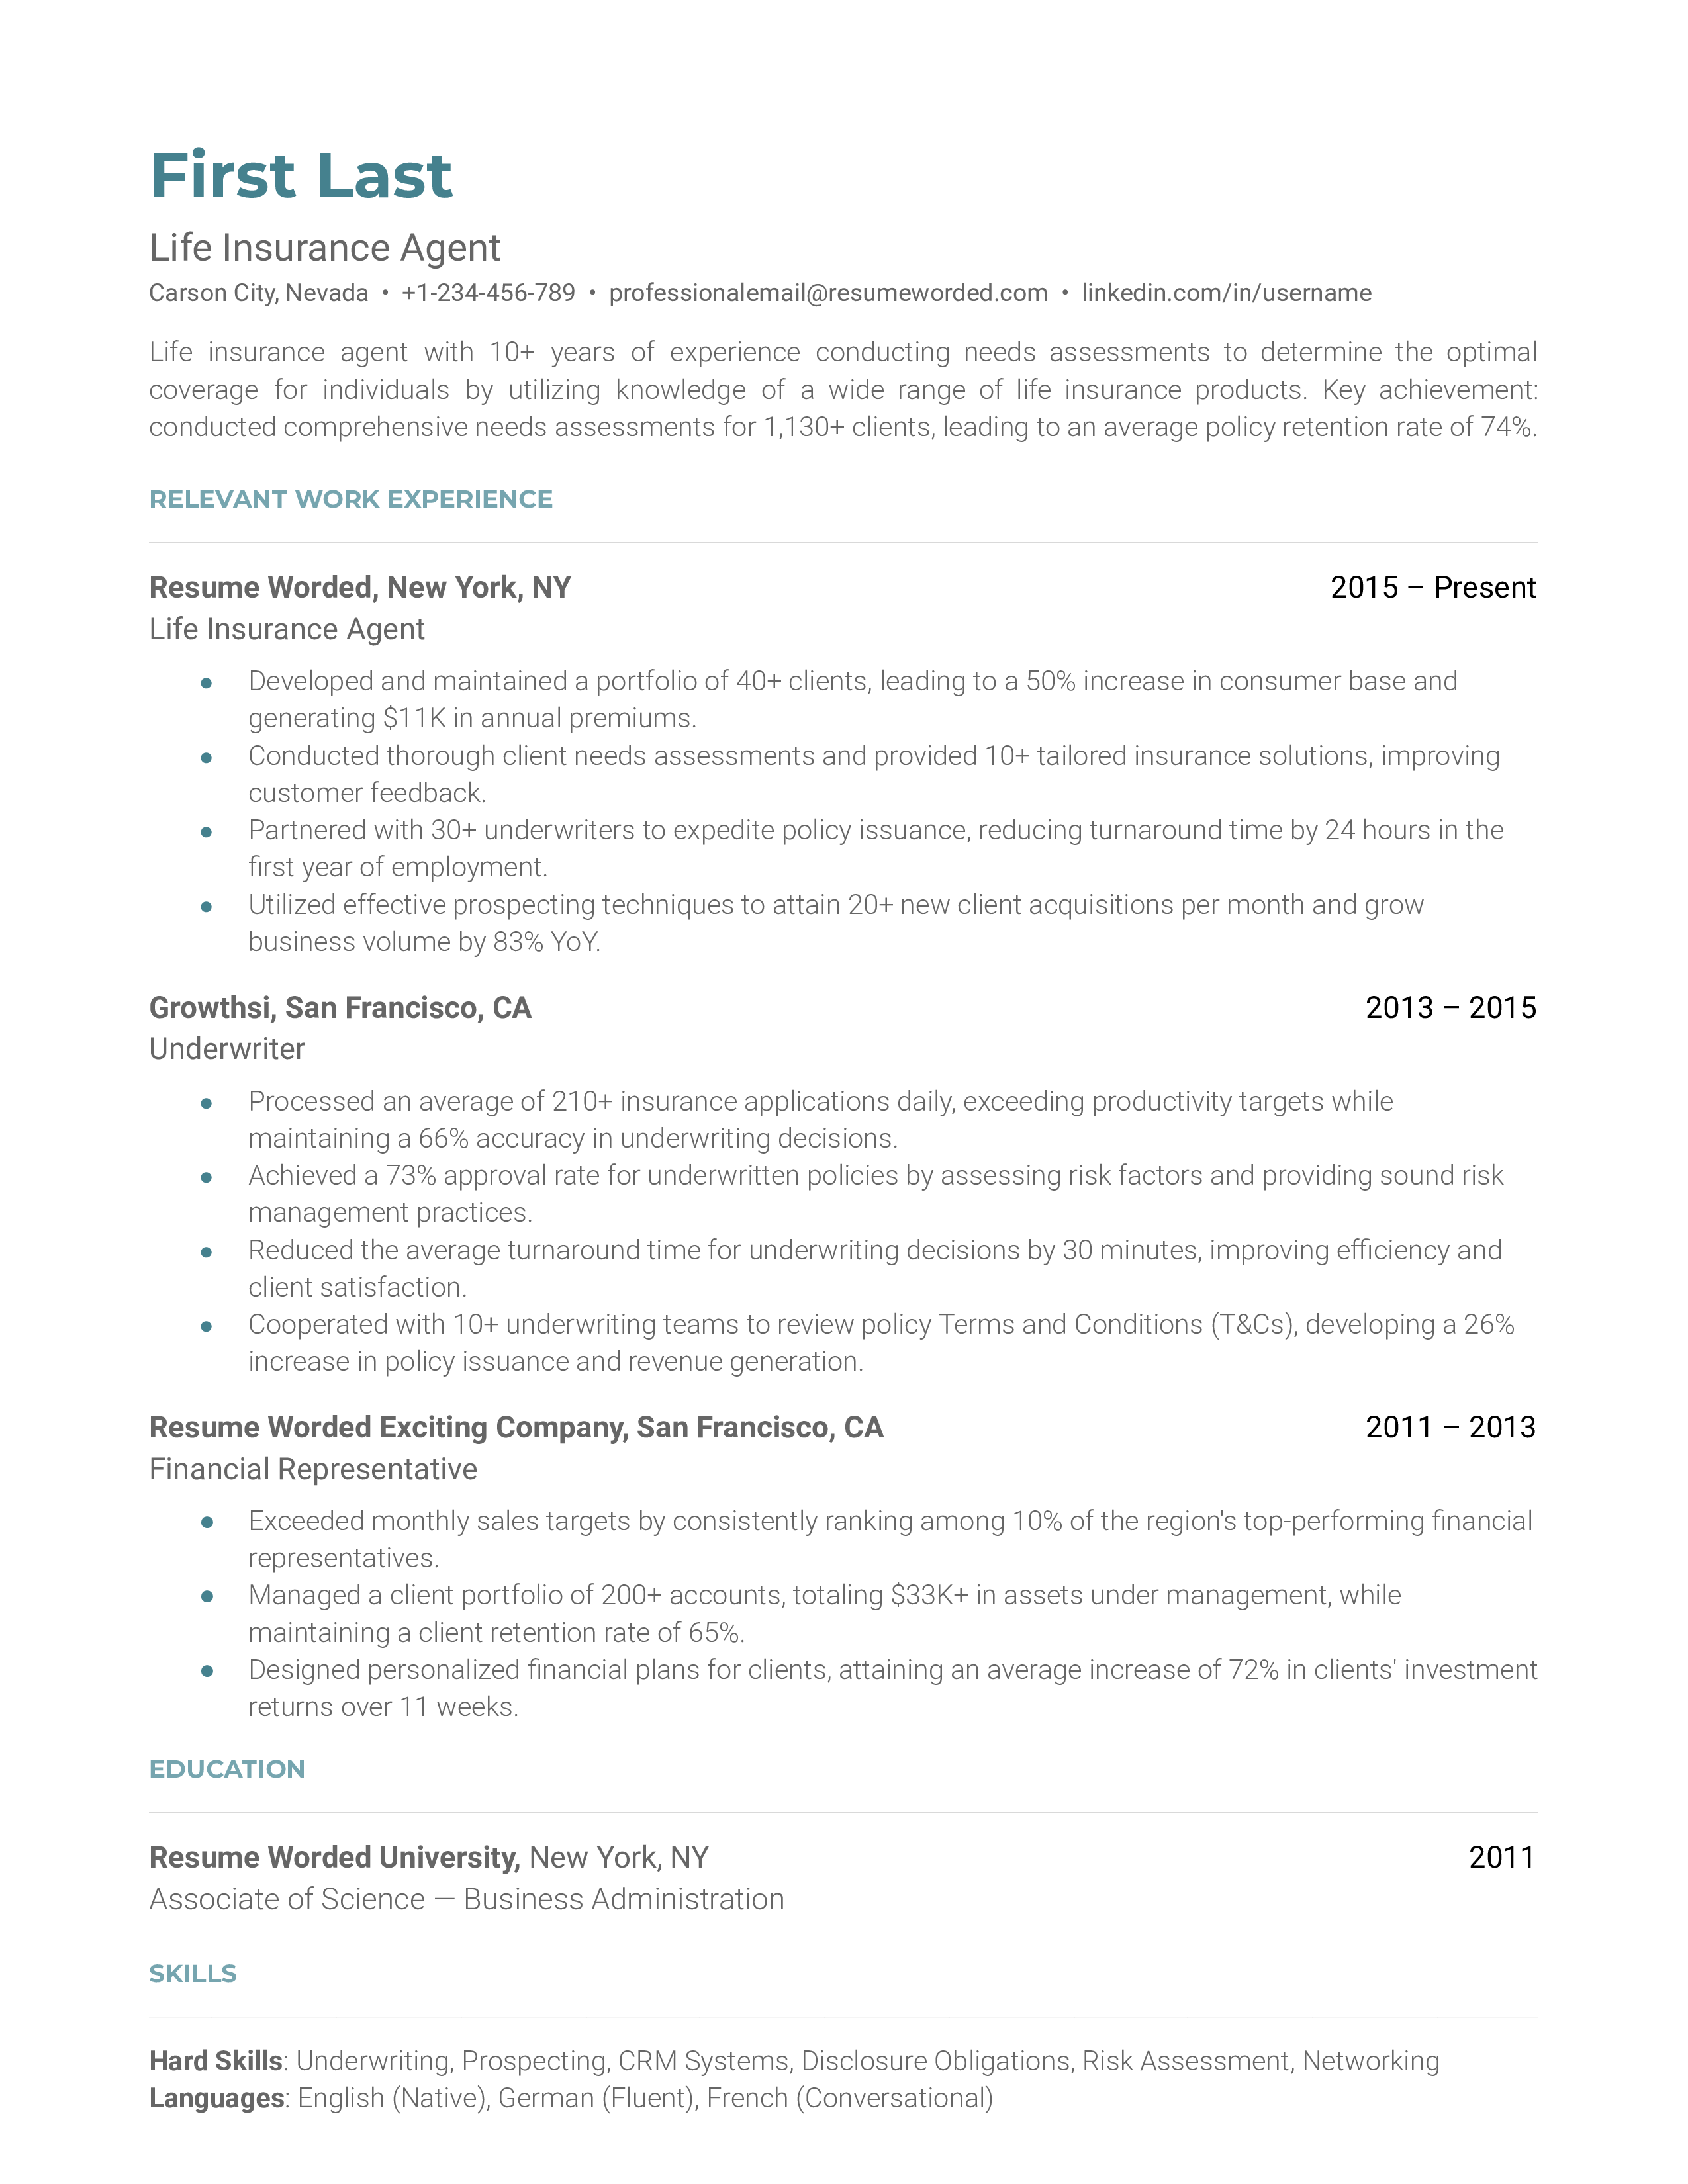 Professional resume of a life insurance agent highlighting digital proficiency and education-focused selling skills.